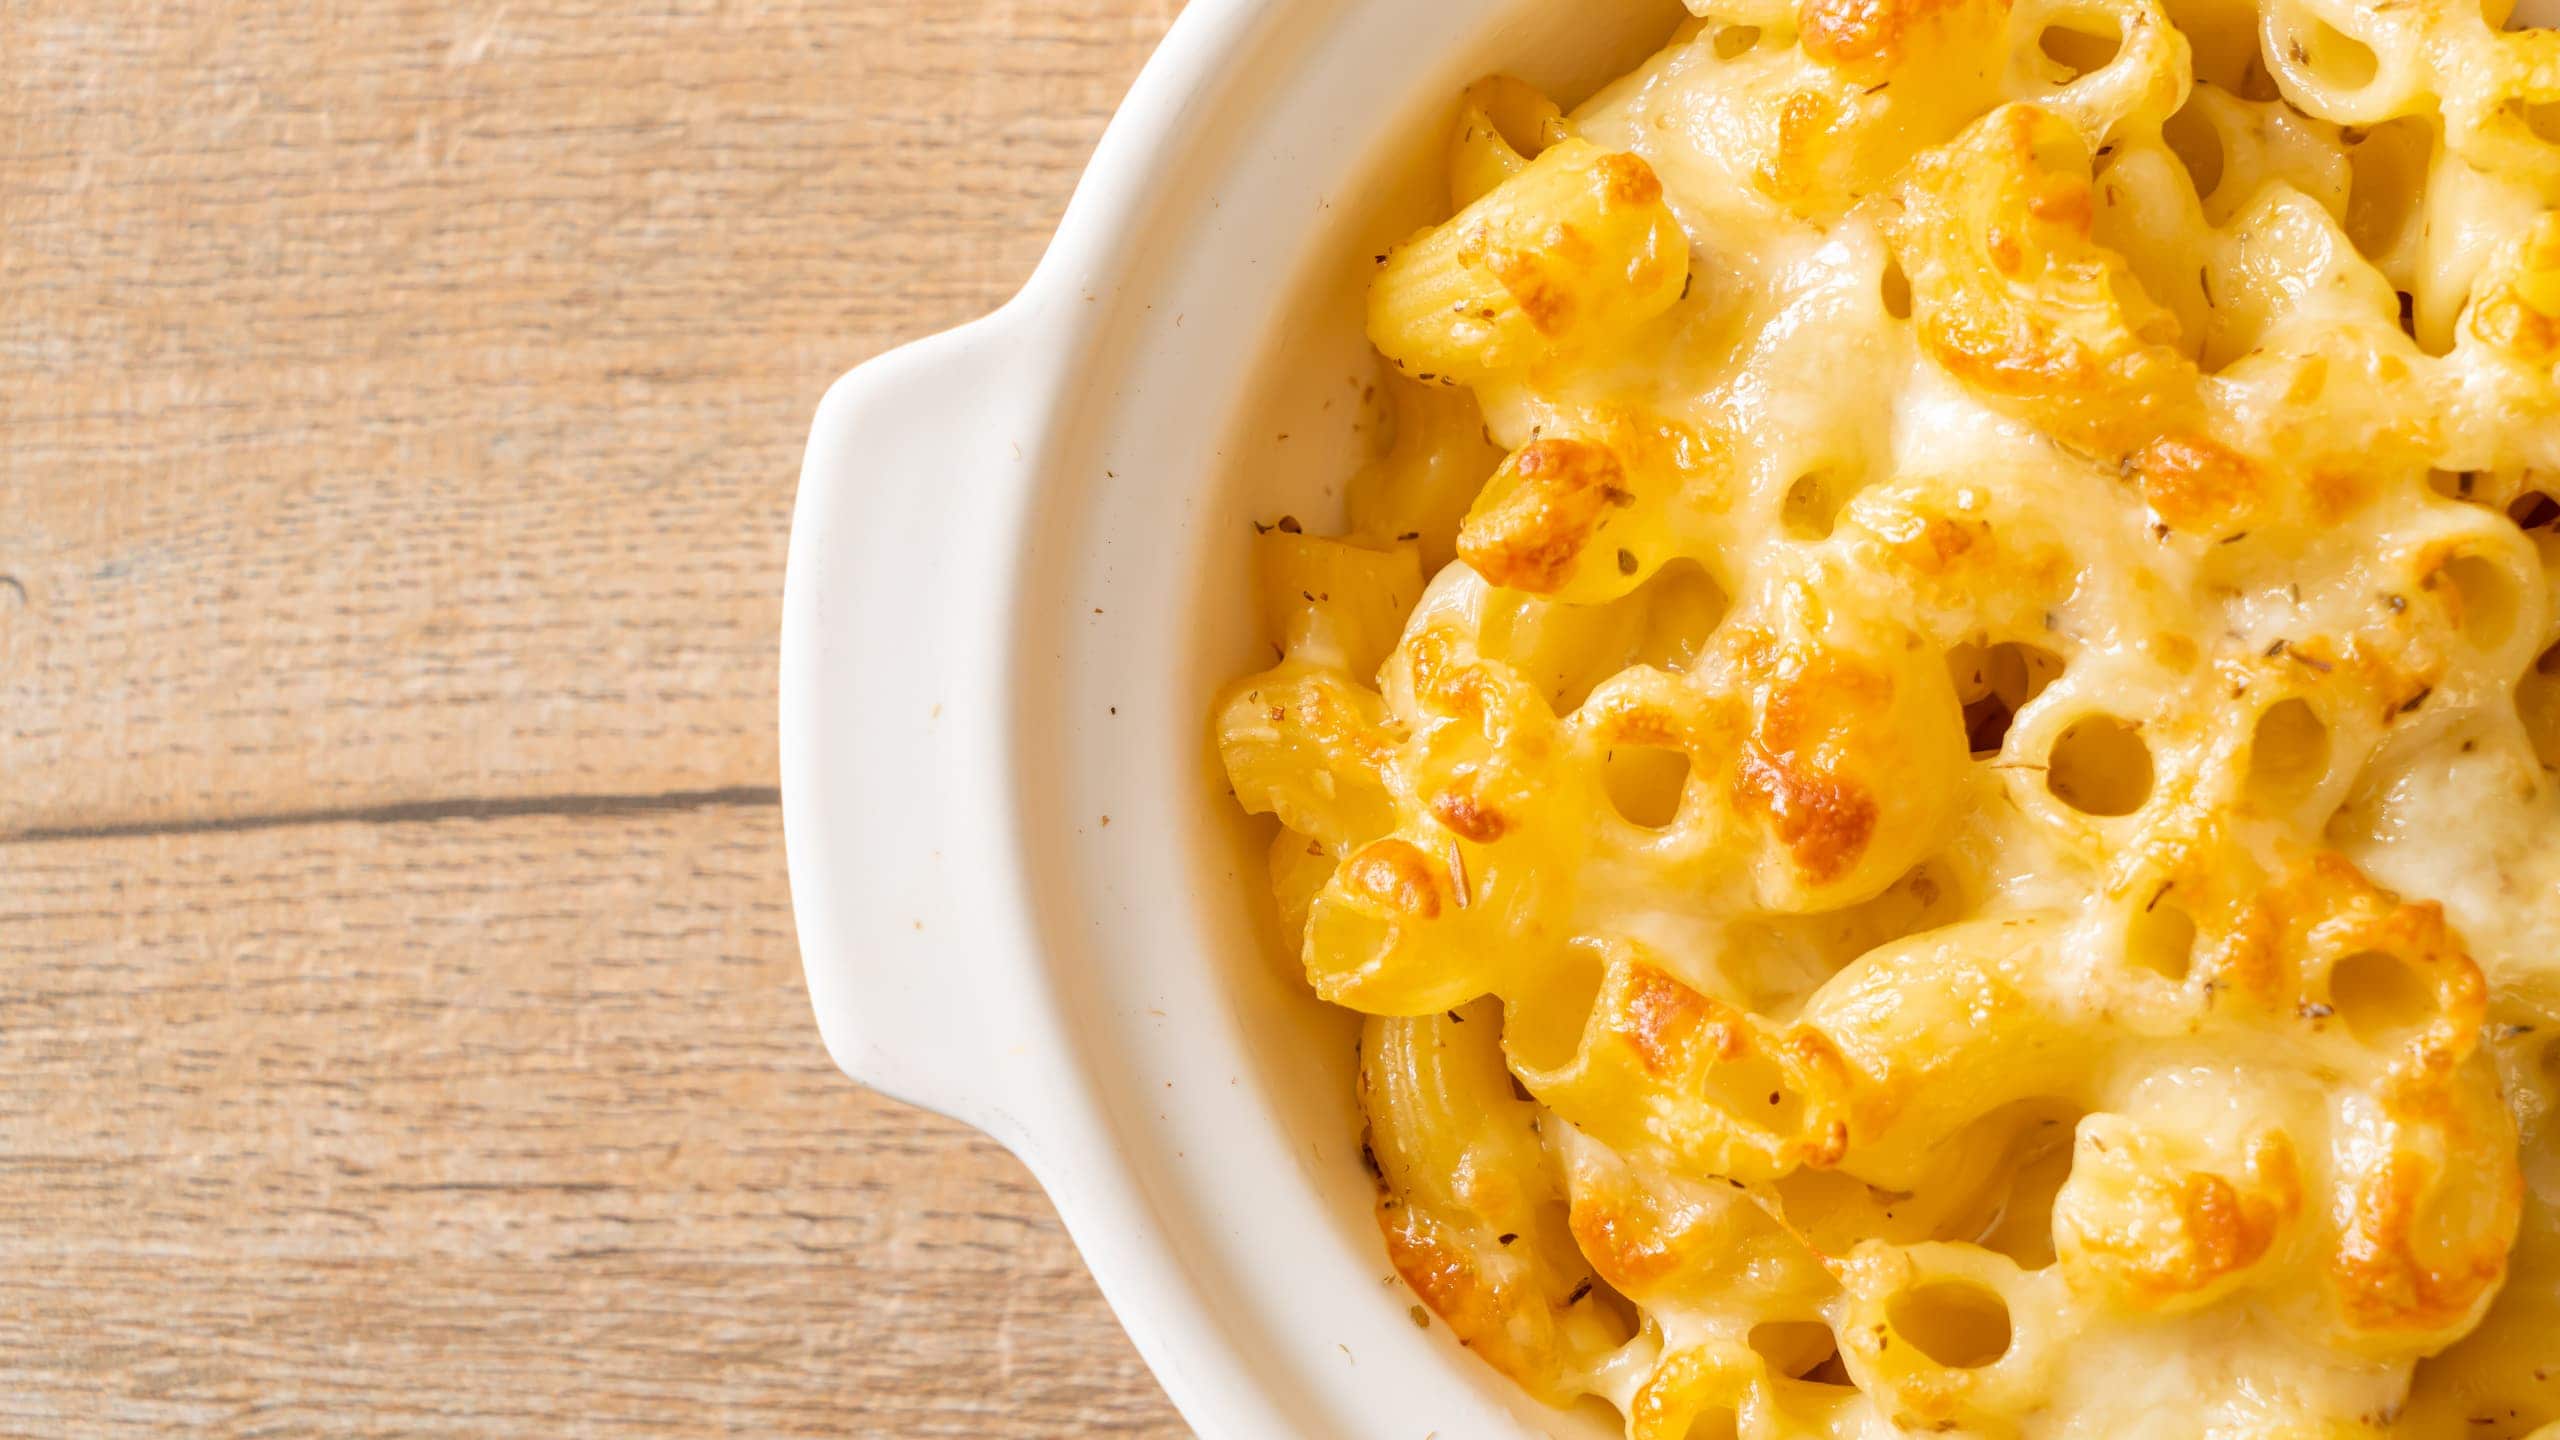 Creamy and delicious Joanna Gaines macaroni and cheese